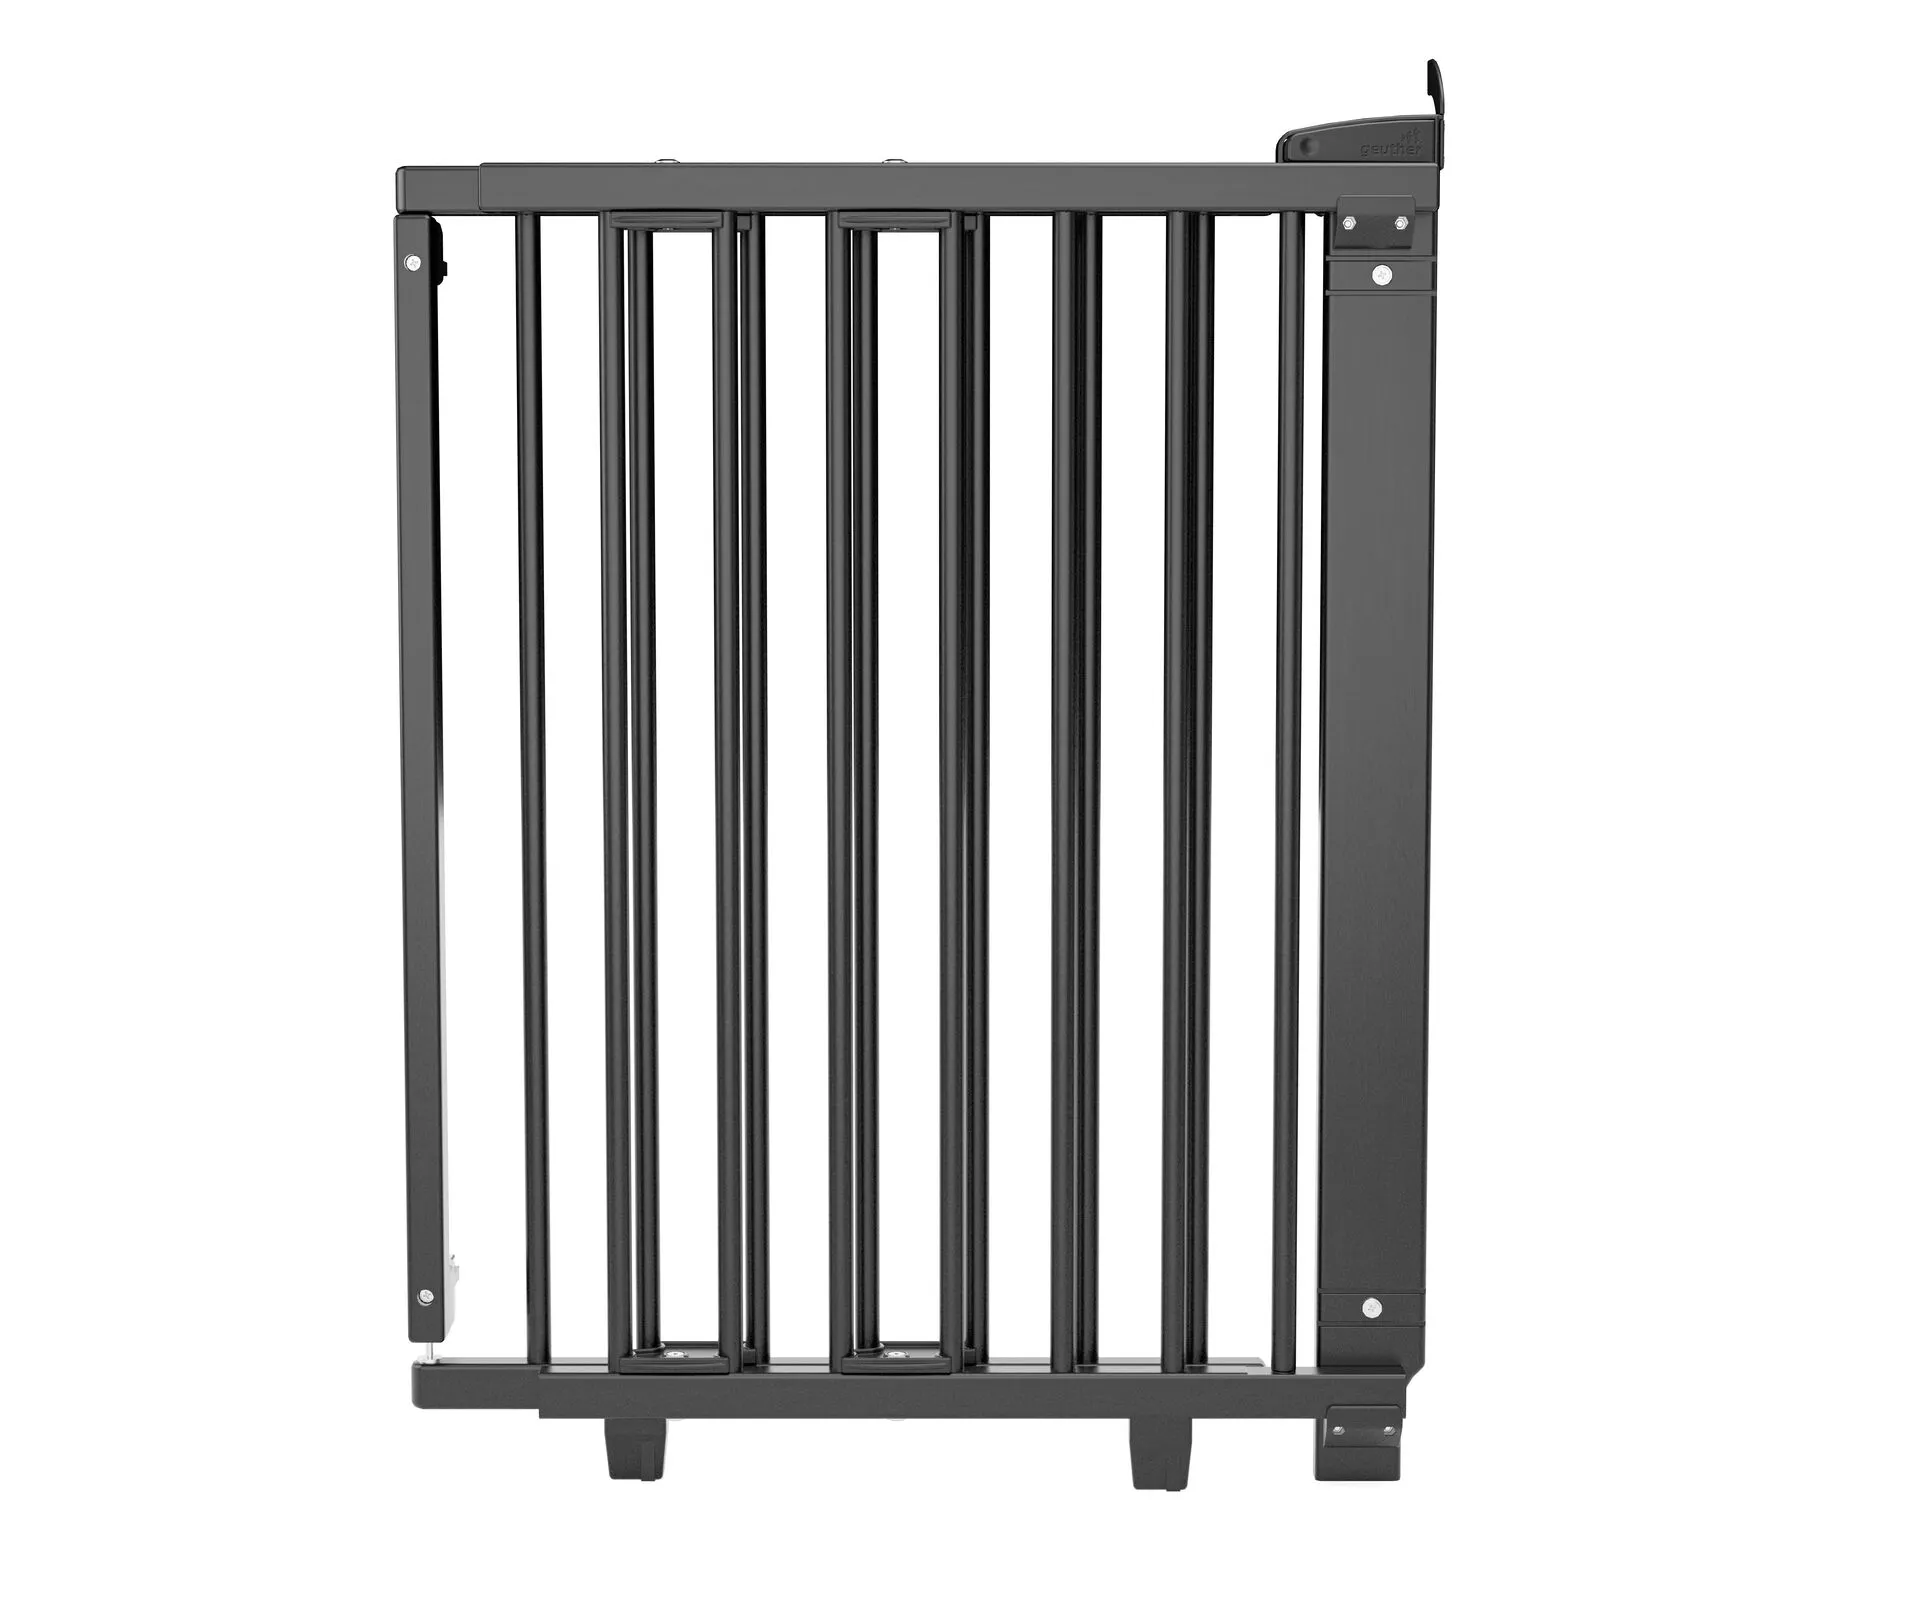 Round bar Door Safety Gate 2732 for openings 58-105cm in wood